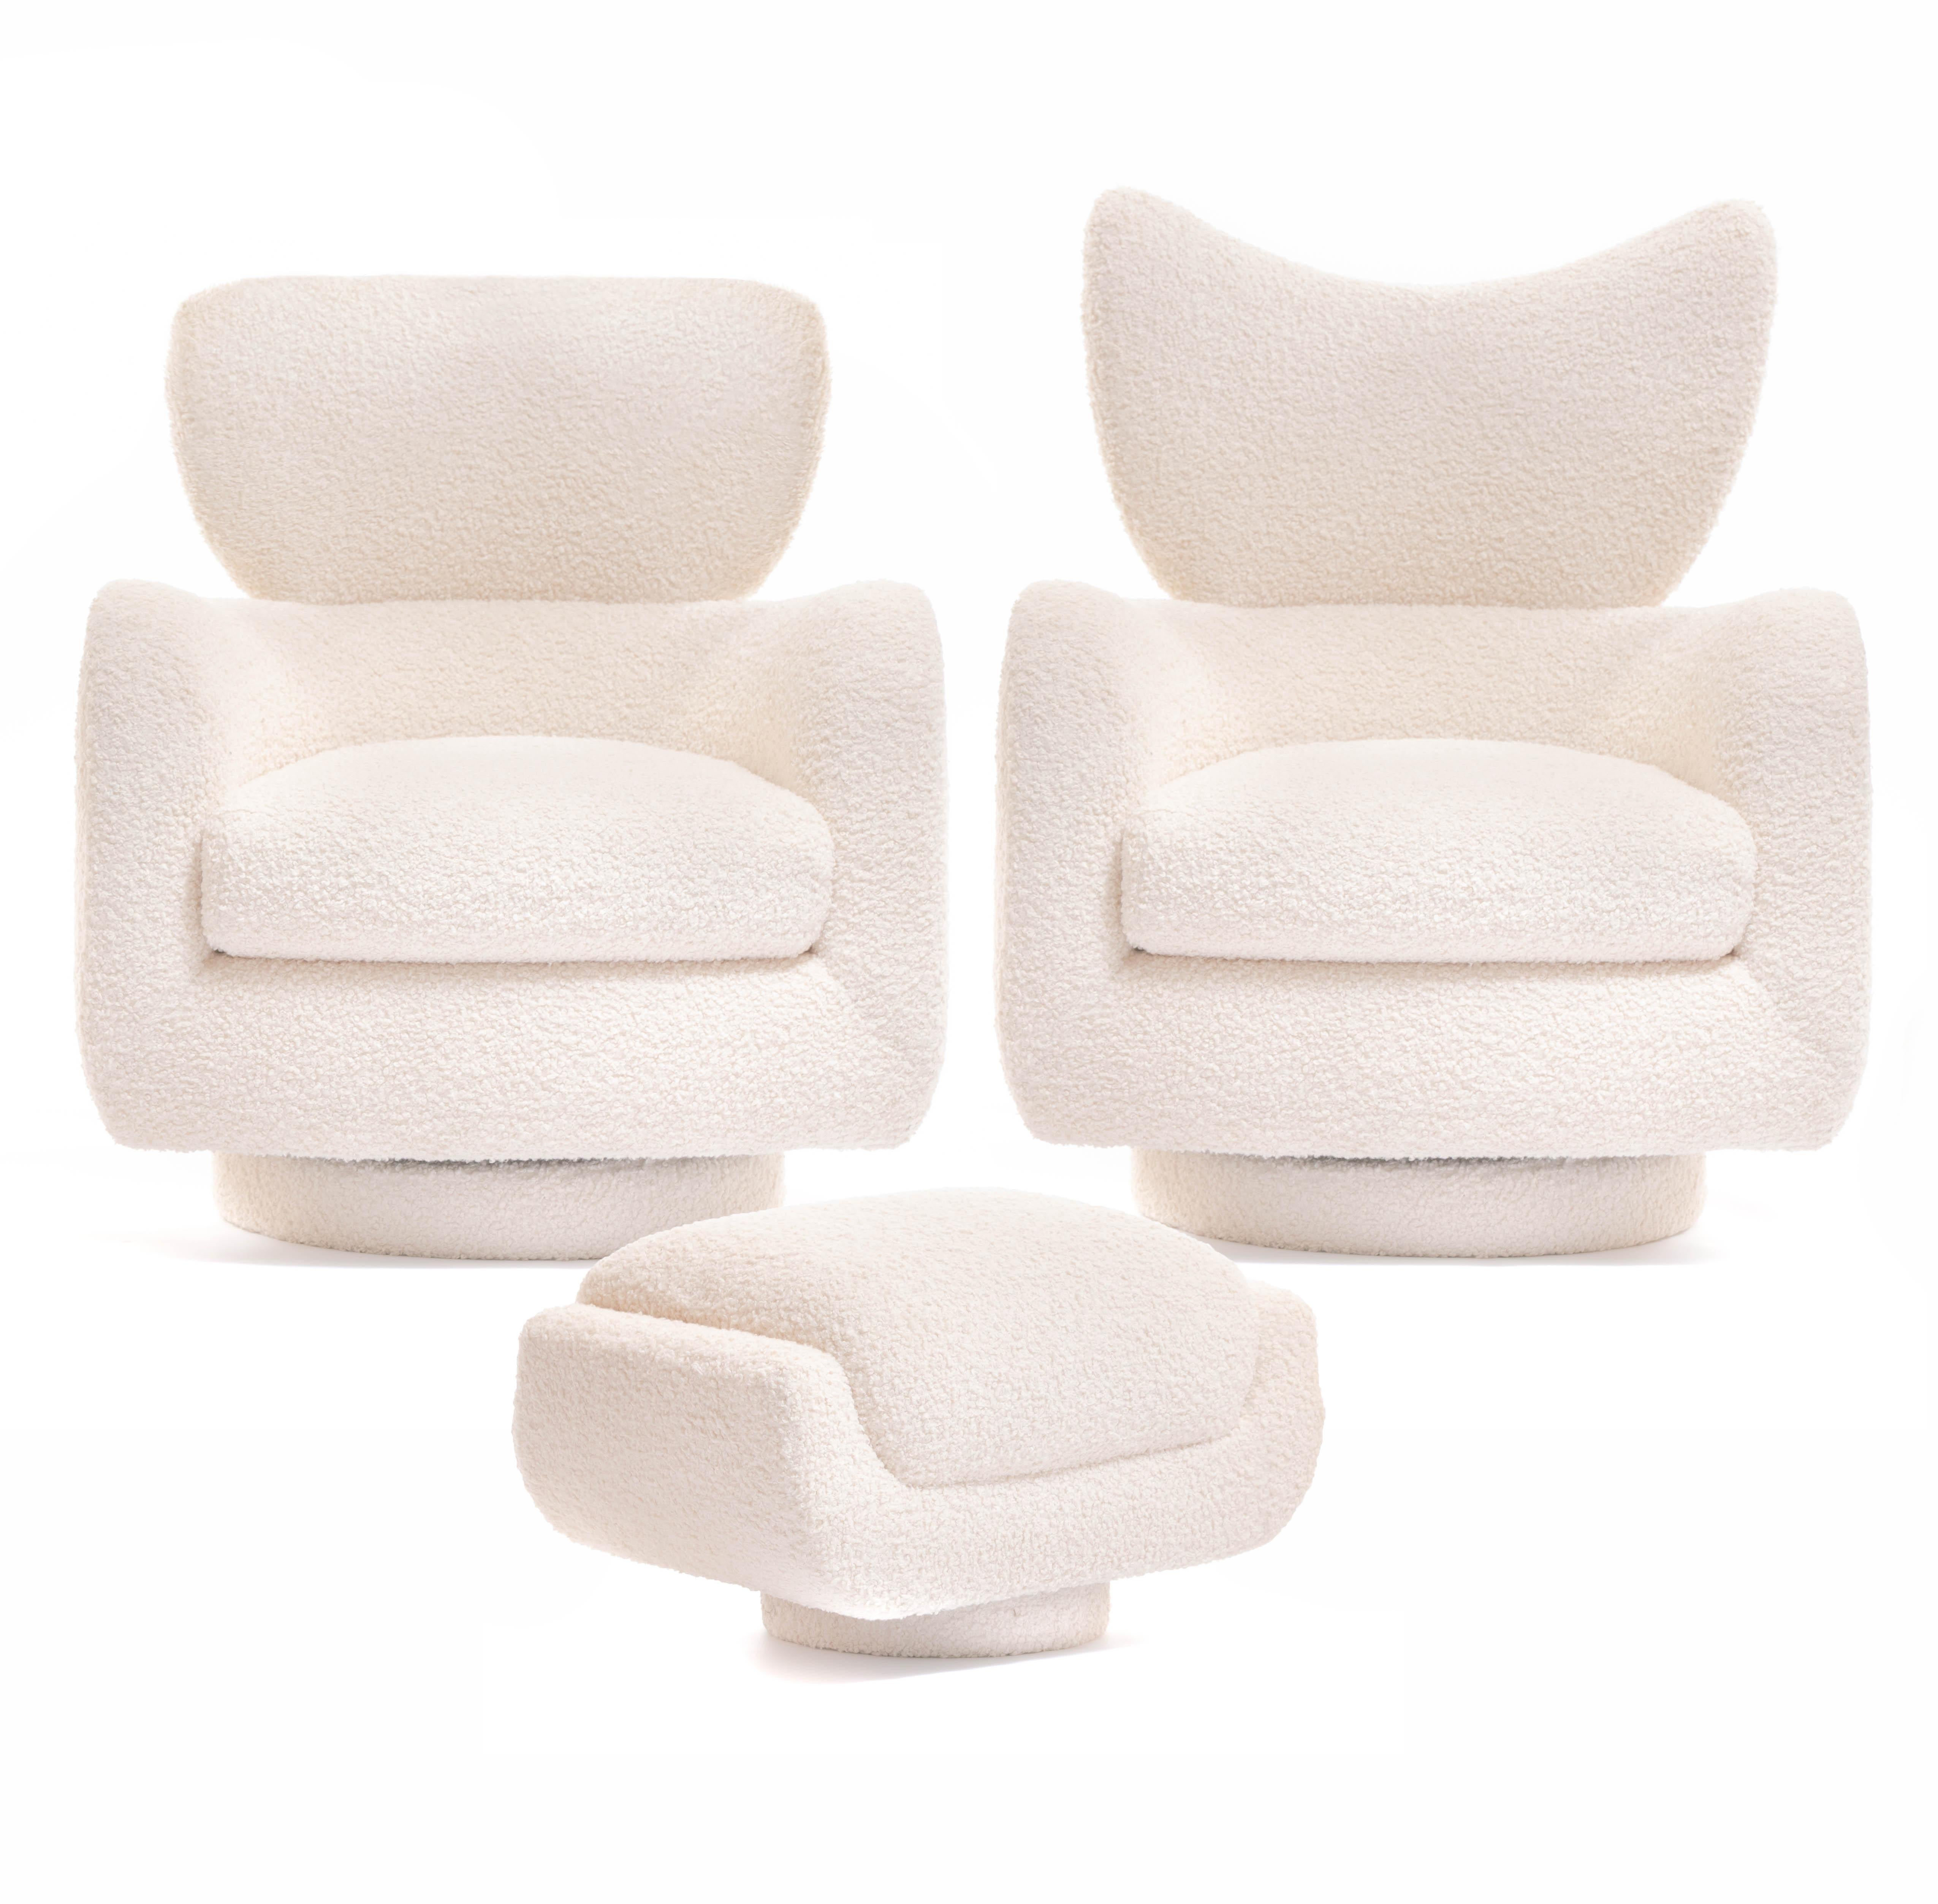 If you want to be the envy of your friends and fellow designers, here's how you do it. Our shop is very excited to offer a rare pair of Mom & Pop Vladimir Kagan swivel wingback chairs with matching ottomans, freshly and expertly reupholstered in